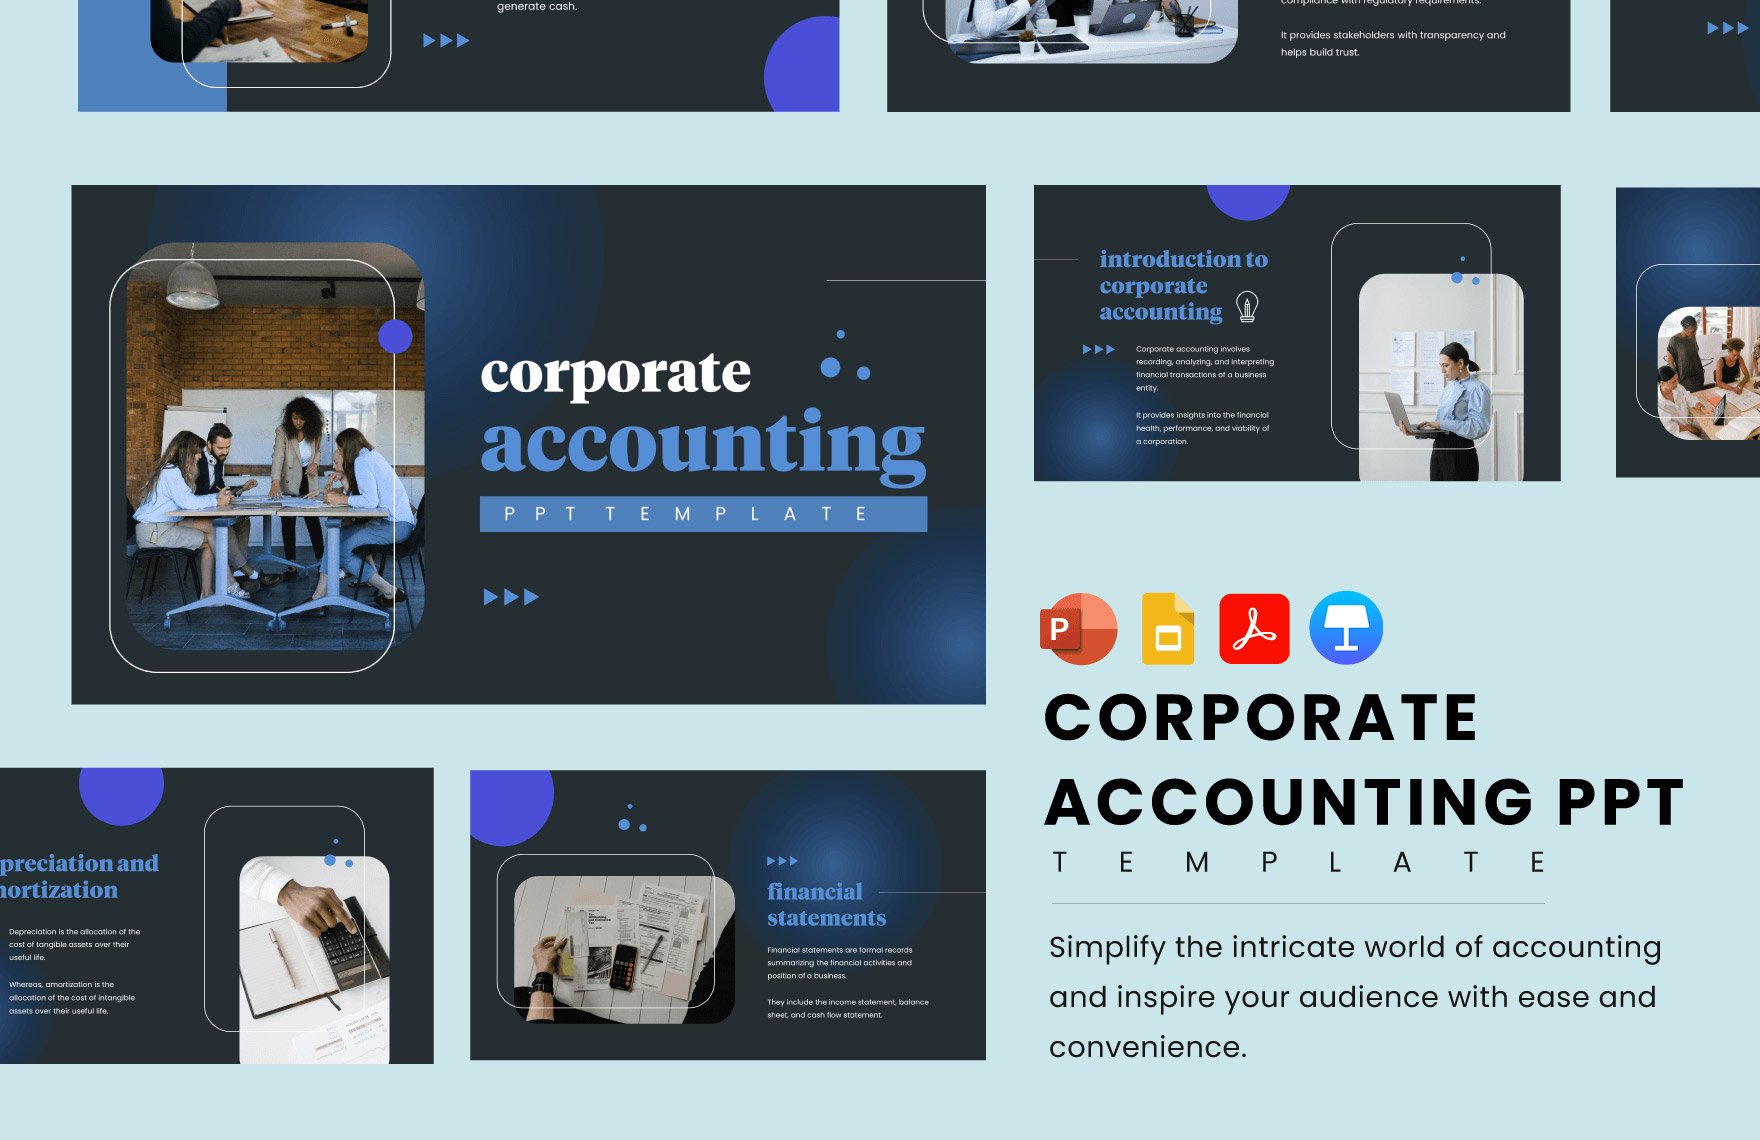 Corporate Accounting PPT Template in PDF, PowerPoint, Google Slides, Apple Keynote